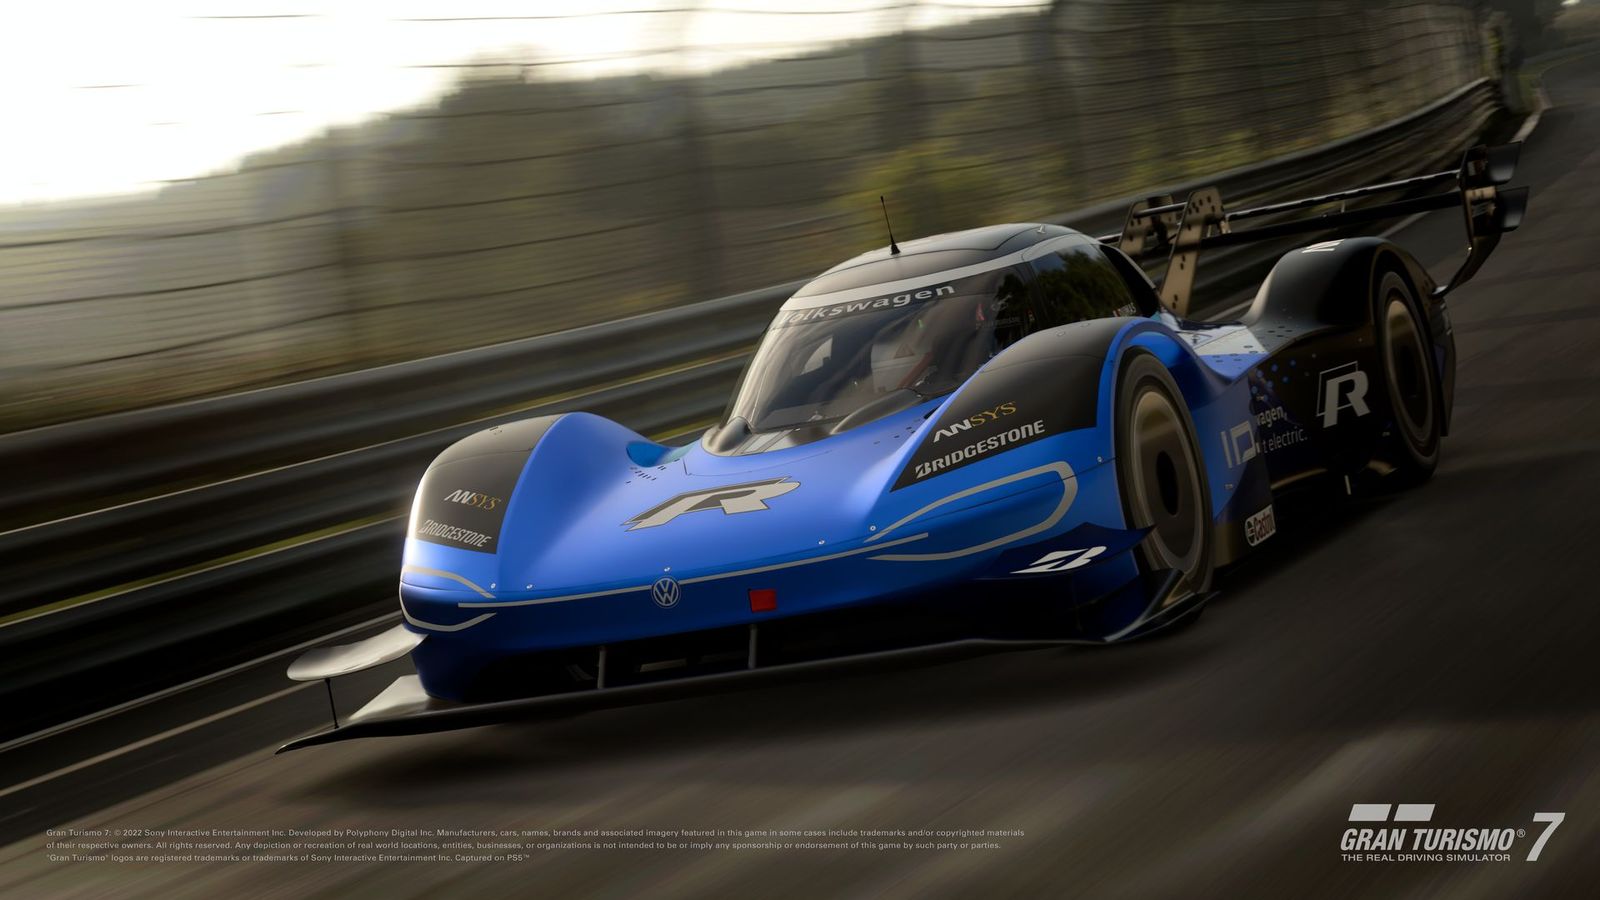 Gran Turismo 7 update 1.24 patch notes